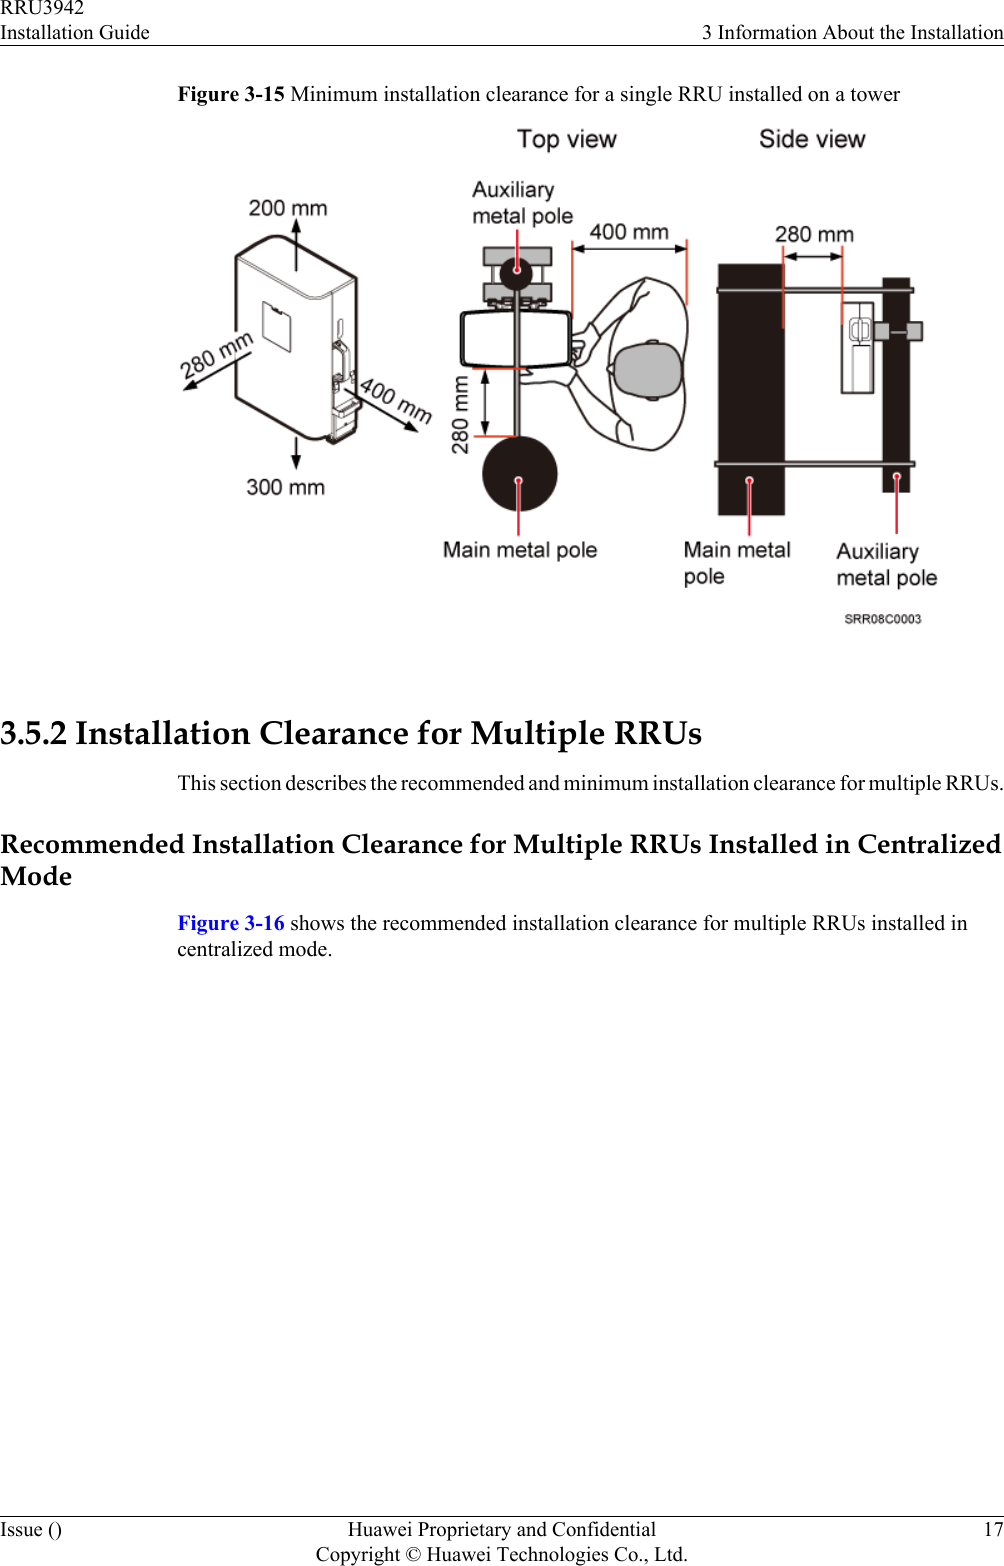 Figure 3-15 Minimum installation clearance for a single RRU installed on a tower 3.5.2 Installation Clearance for Multiple RRUsThis section describes the recommended and minimum installation clearance for multiple RRUs.Recommended Installation Clearance for Multiple RRUs Installed in CentralizedModeFigure 3-16 shows the recommended installation clearance for multiple RRUs installed incentralized mode.RRU3942Installation Guide 3 Information About the InstallationIssue () Huawei Proprietary and ConfidentialCopyright © Huawei Technologies Co., Ltd.17